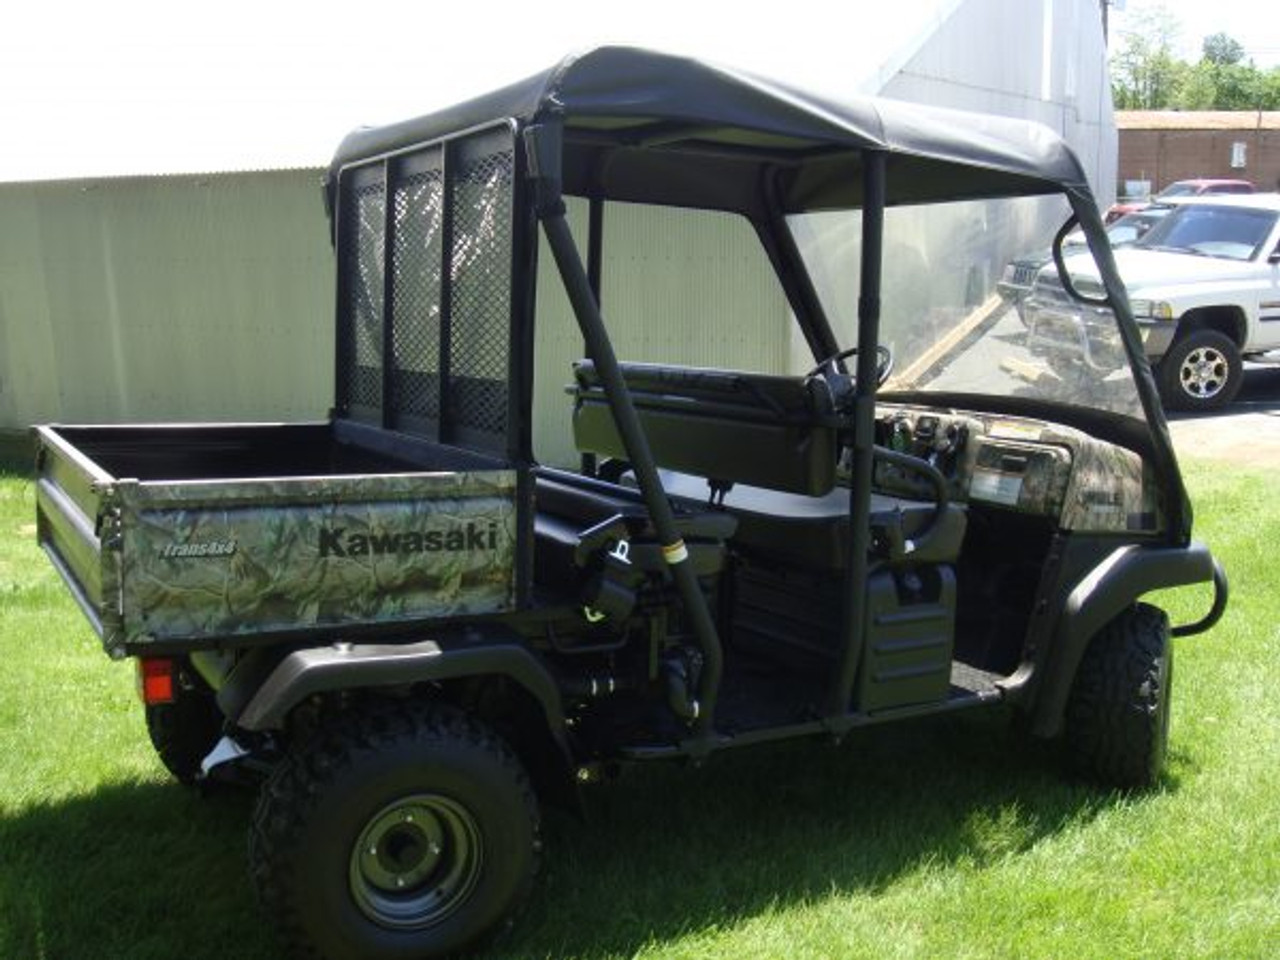 3 Star side x side Kawasaki Mule 3000/3010 Trans vinyl windshield and top side angle view